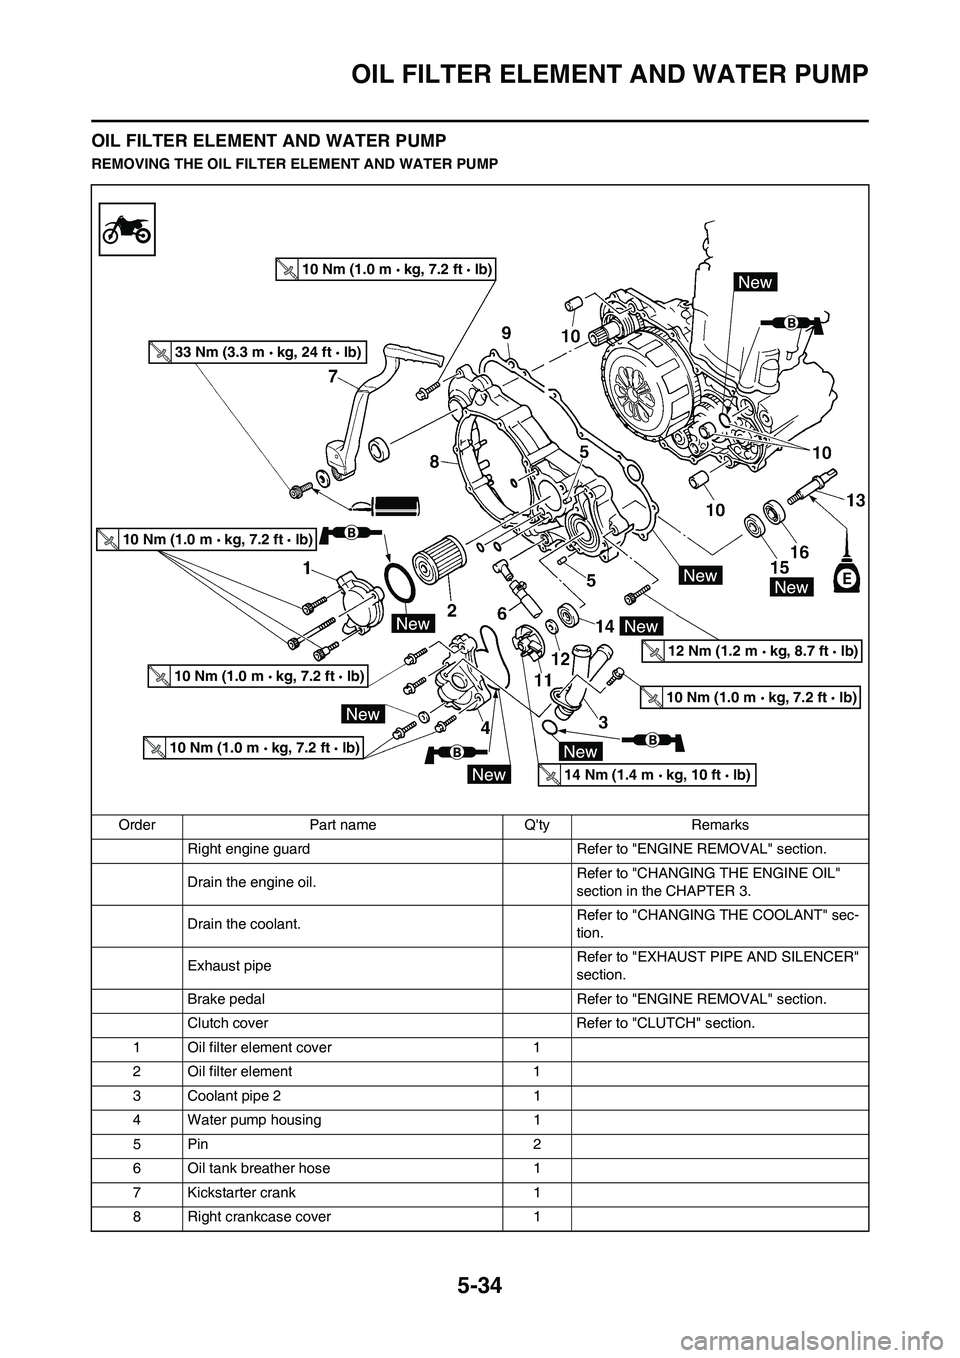 YAMAHA WR 450F 2010 Owners Guide 5-34
OIL FILTER ELEMENT AND WATER PUMP
OIL FILTER ELEMENT AND WATER PUMP
REMOVING THE OIL FILTER ELEMENT AND WATER PUMP
Order Part name Qty Remarks
Right engine guard  Refer to "ENGINE REMOVAL" secti